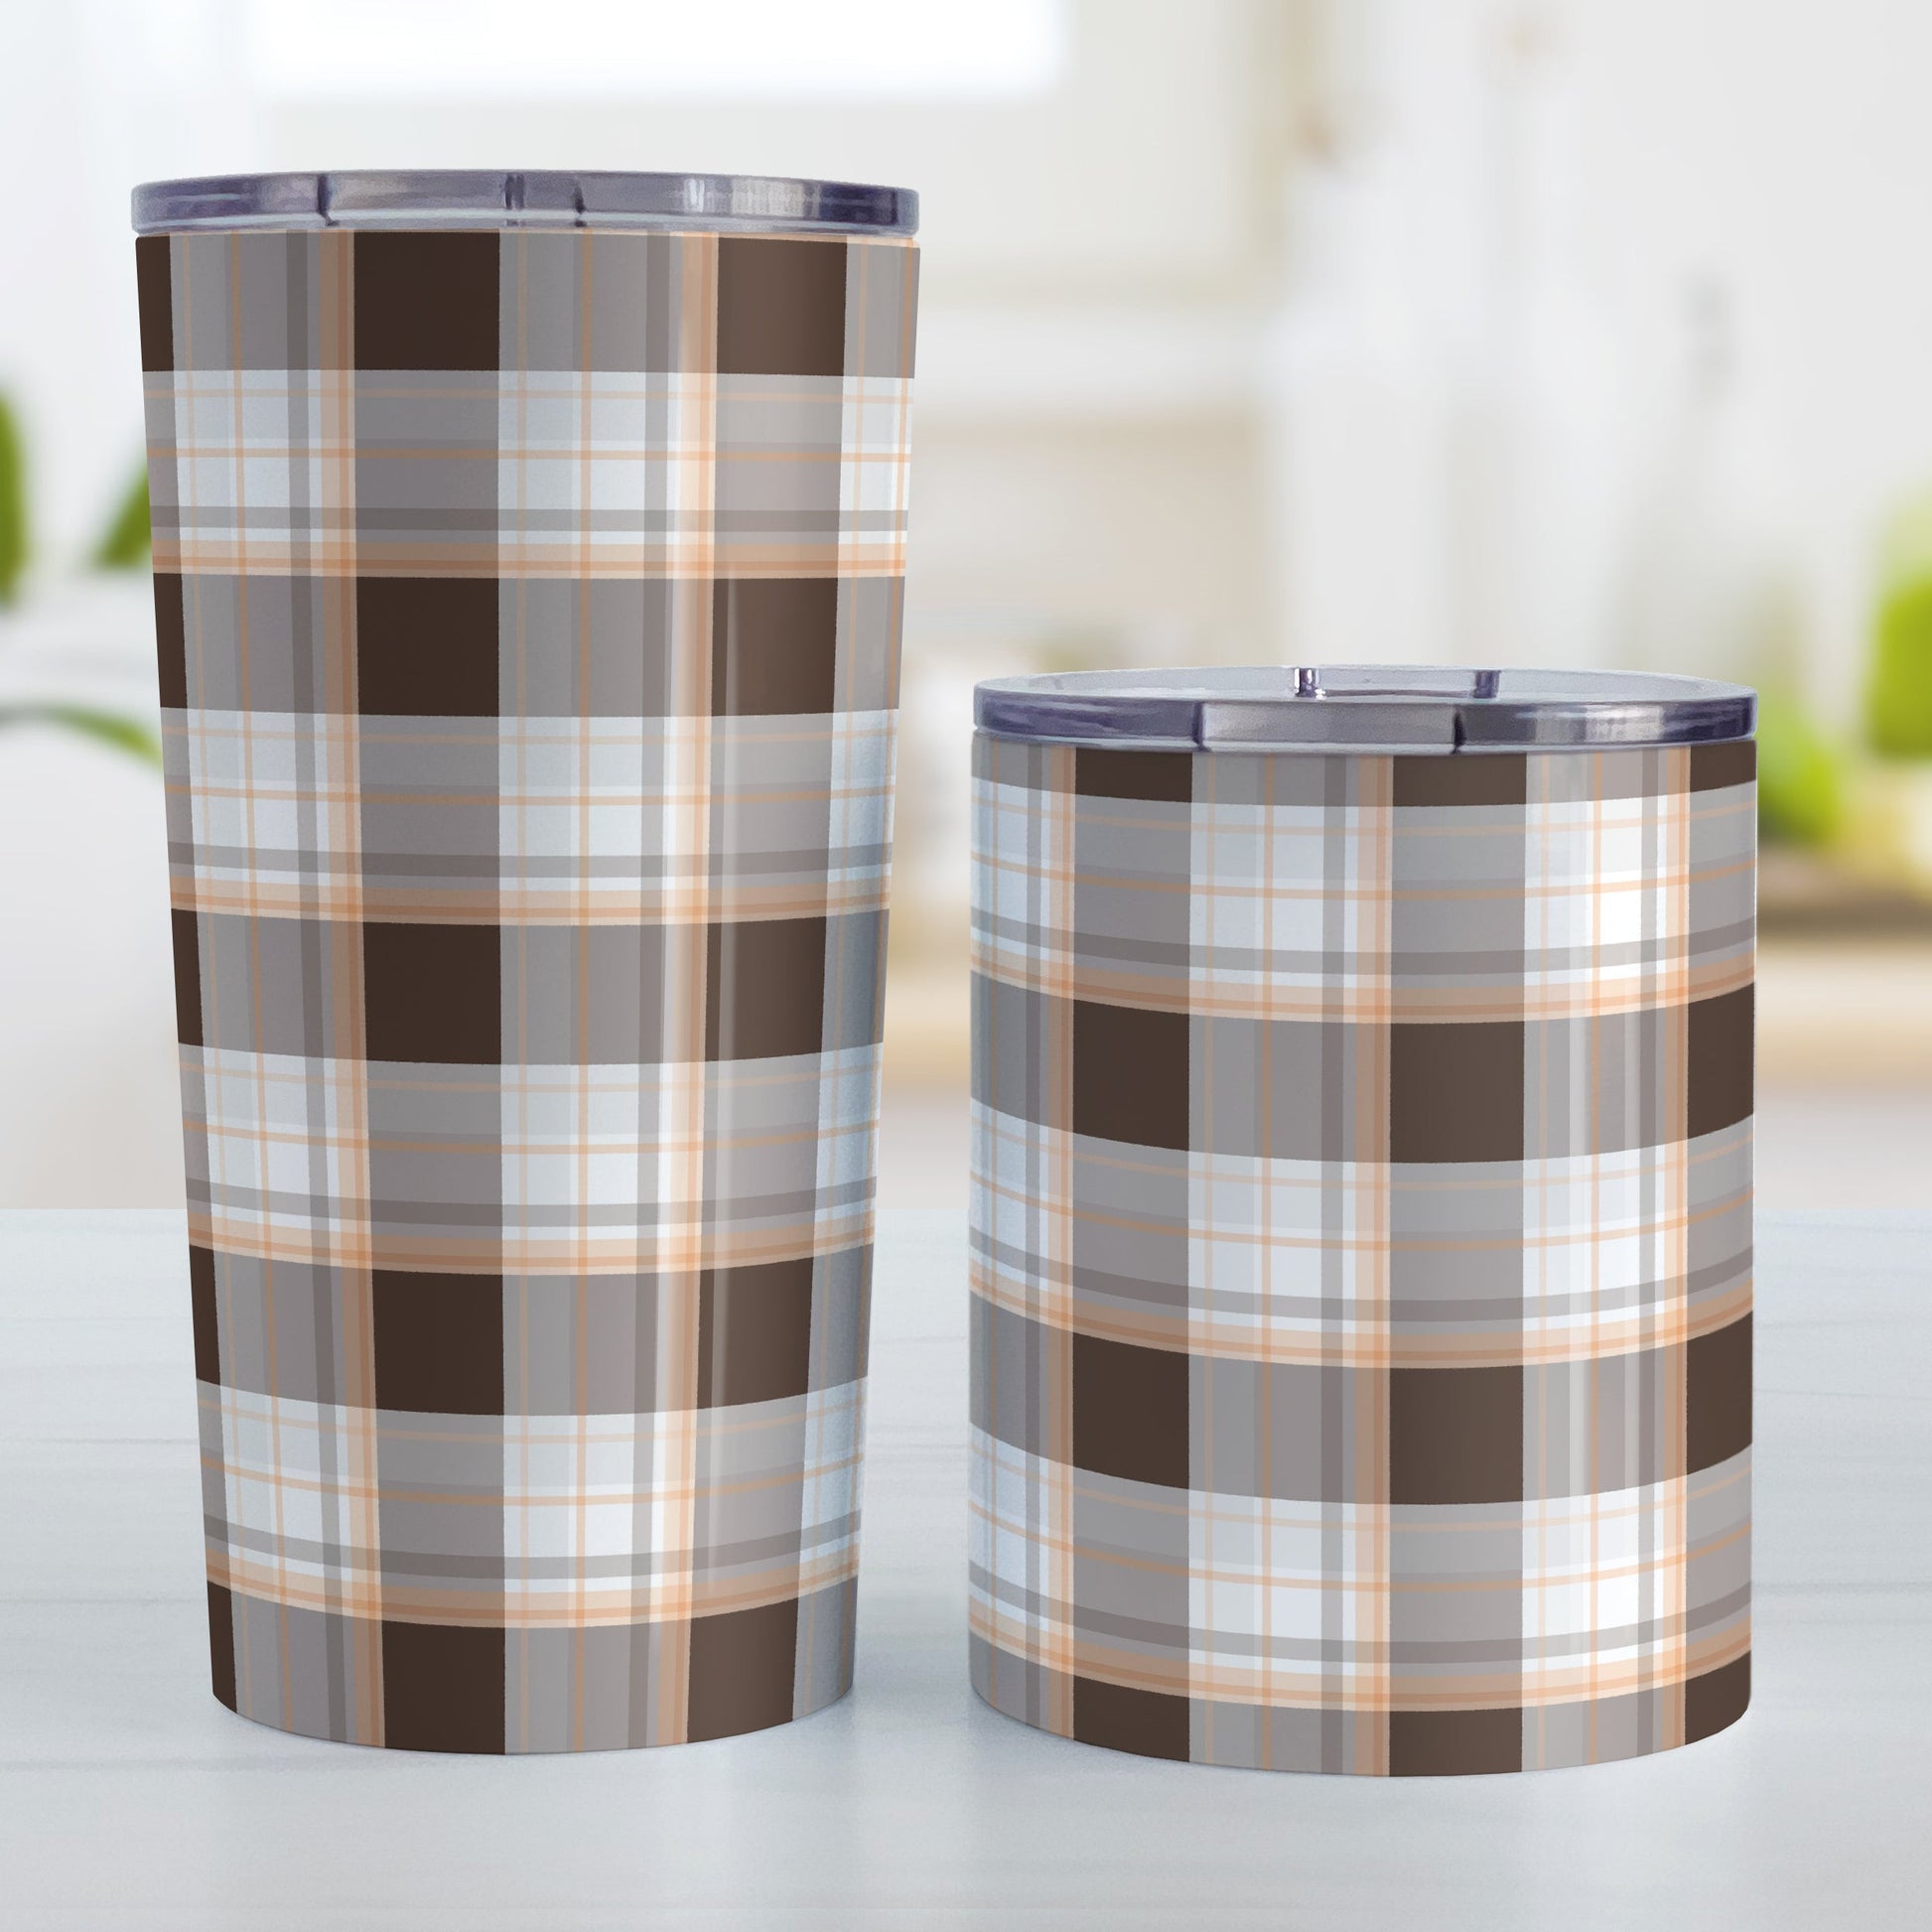 Brown Orange Plaid Tumbler Cup (20oz and 10oz) at Amy's Coffee Mugs. Stainless steel insulated tumbler cups designed with a brown plaid pattern with orange accents that wraps around the cups. Photo shows both sized cups next to each other.